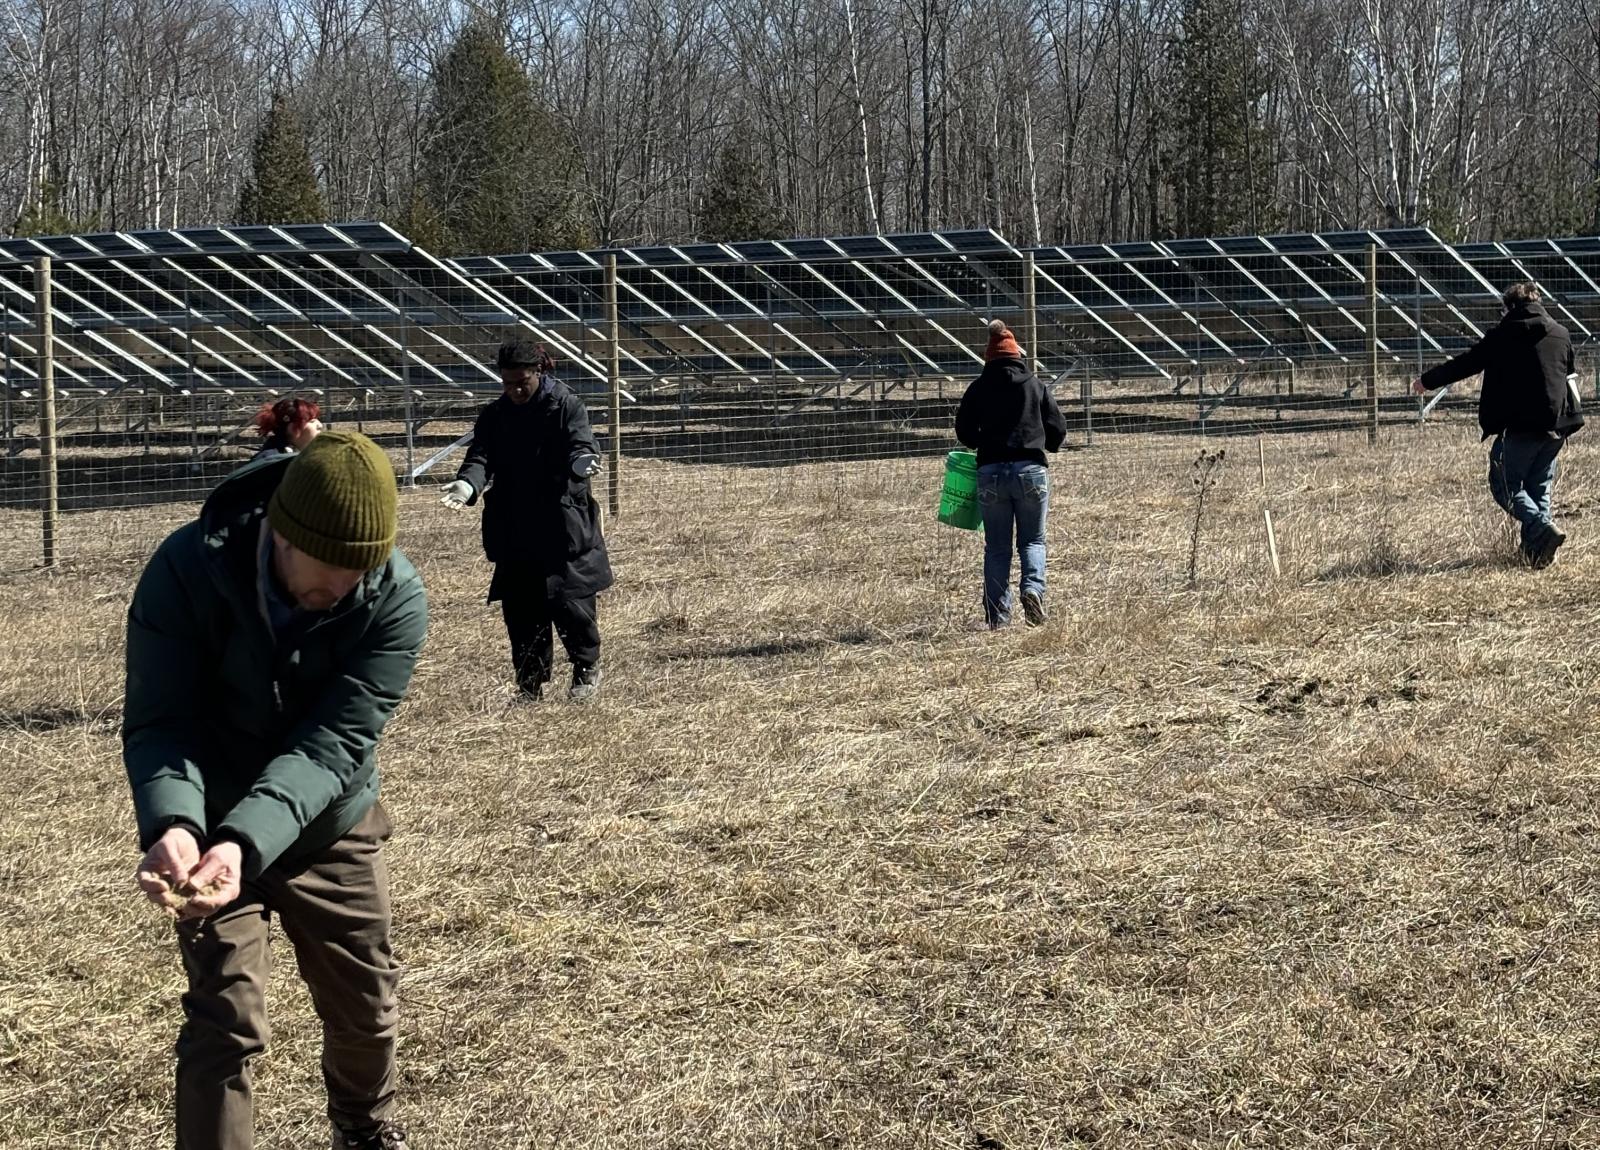 a group of people spreading seeds around a solar field